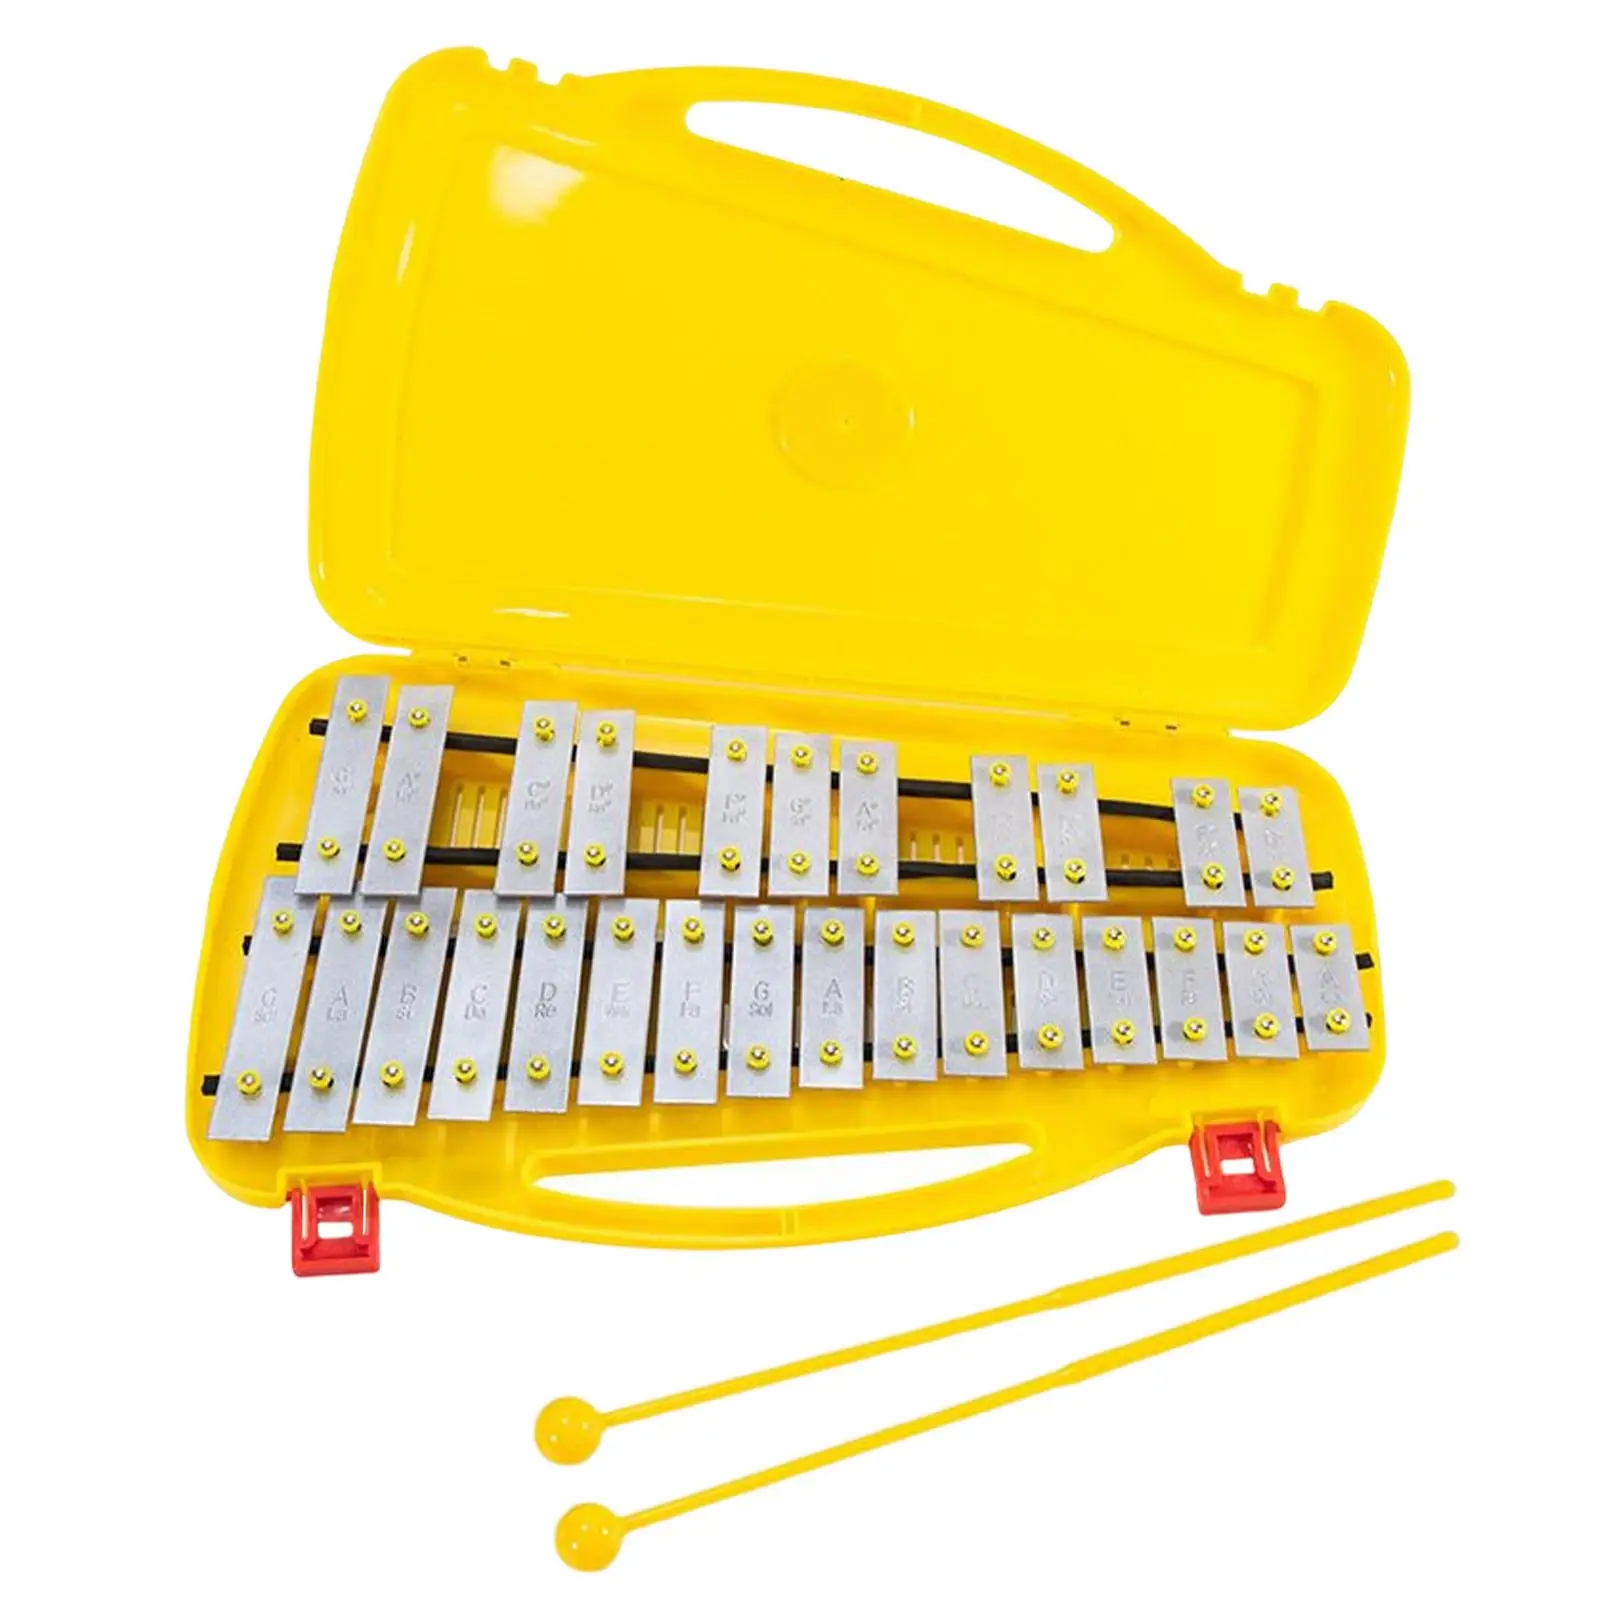 Glockenspiel Perfectly Gift and Two Mallets with 27 Note Xylophone for Toddlers Baby Adult Children Percussion Instruments